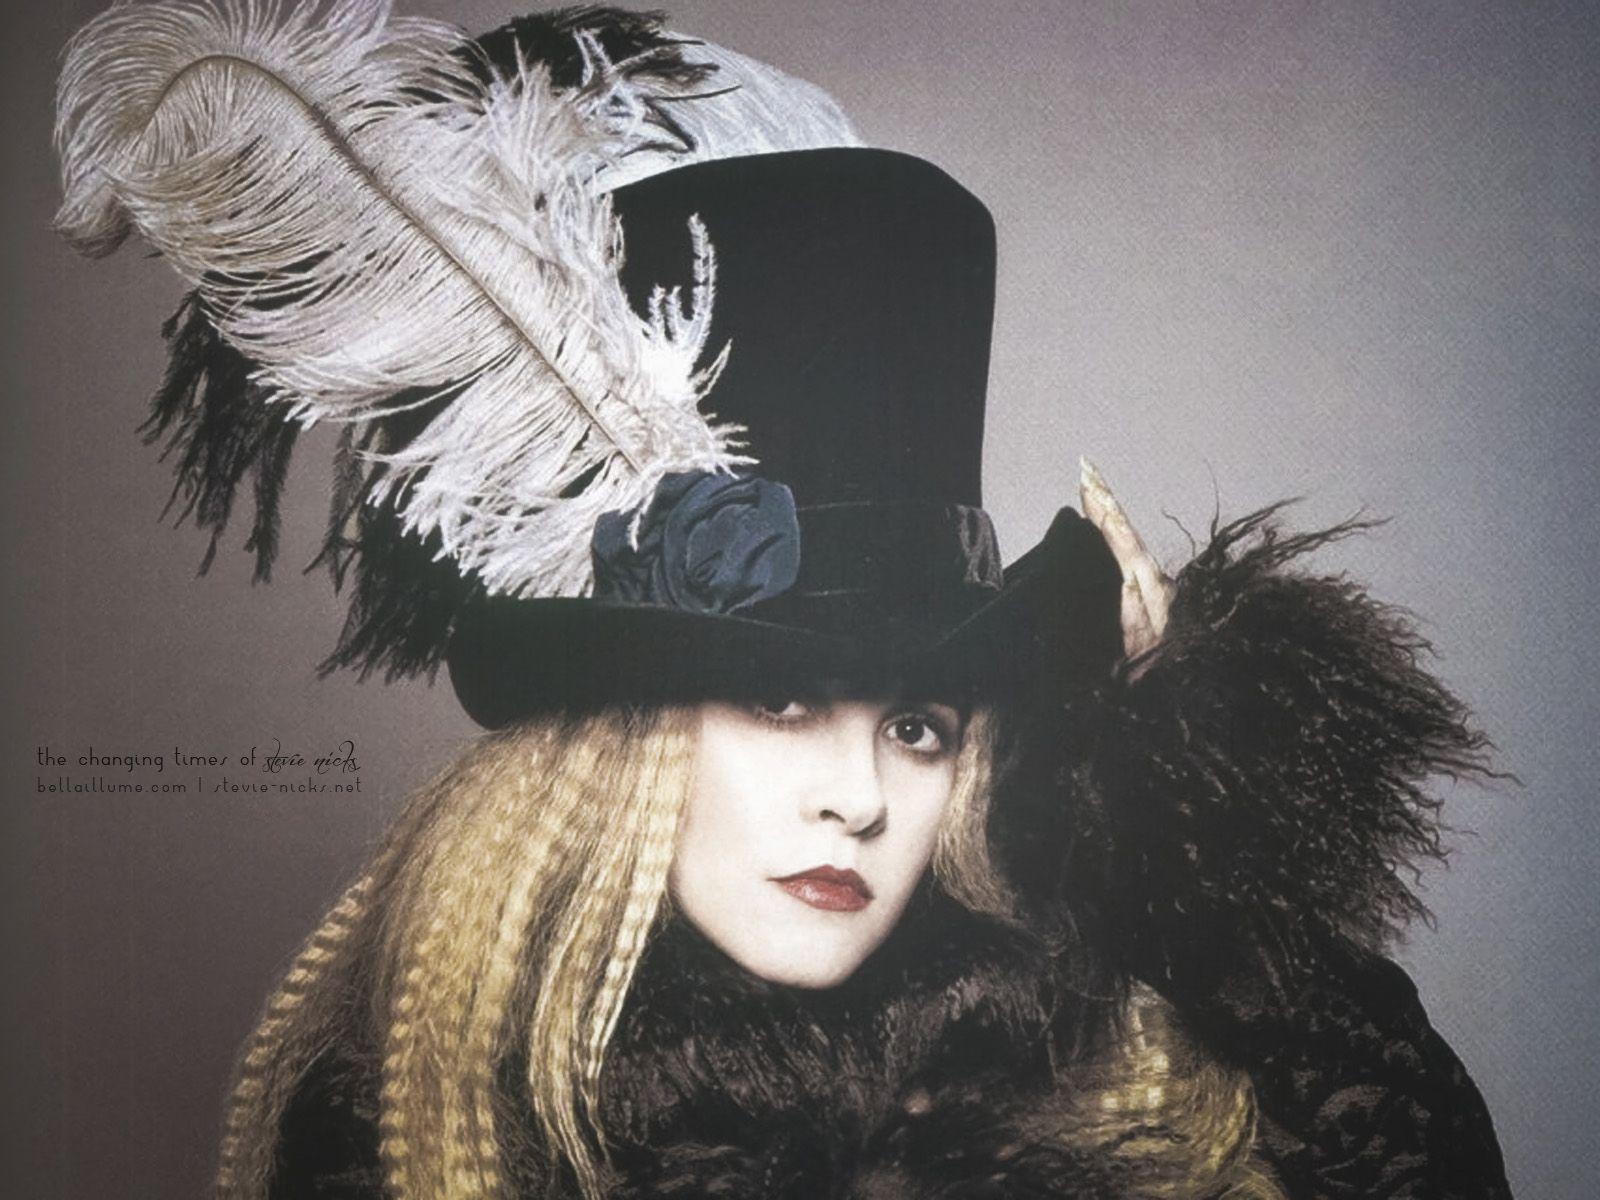 stevie nicks: the site. wallpaper- The wall paper on my cellphone